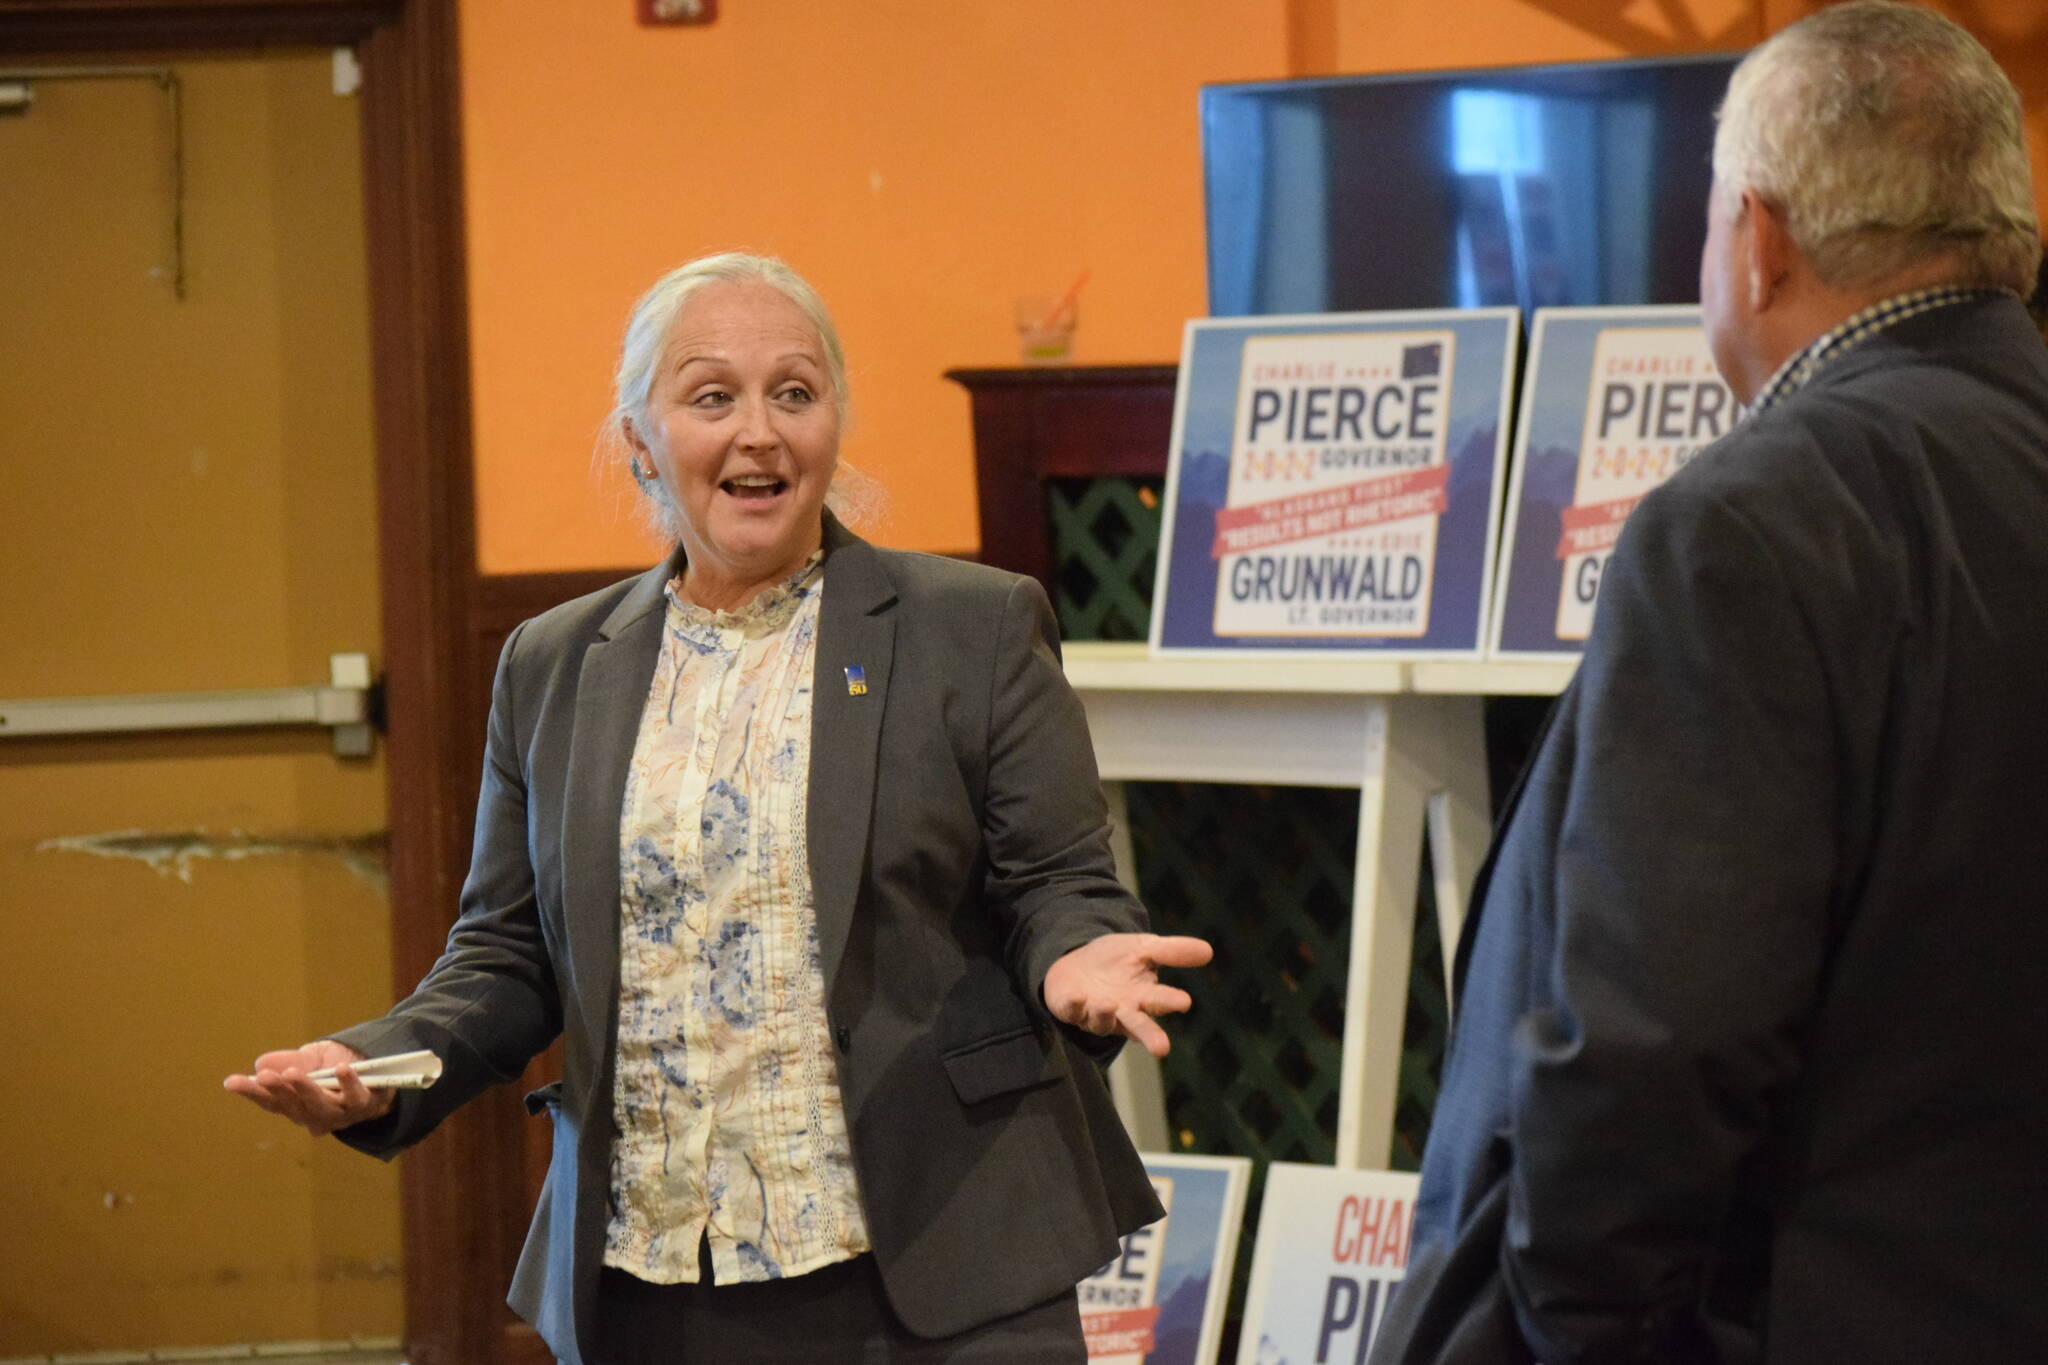 Alaska Gubernatorial candidate Charlie Pierce selects Edie Grunwald to be his running mate at a campaign event at Paradisos restaurant in Kenai on Saturday, March 5, 2022. (Camille Botello/Peninsula Clarion)